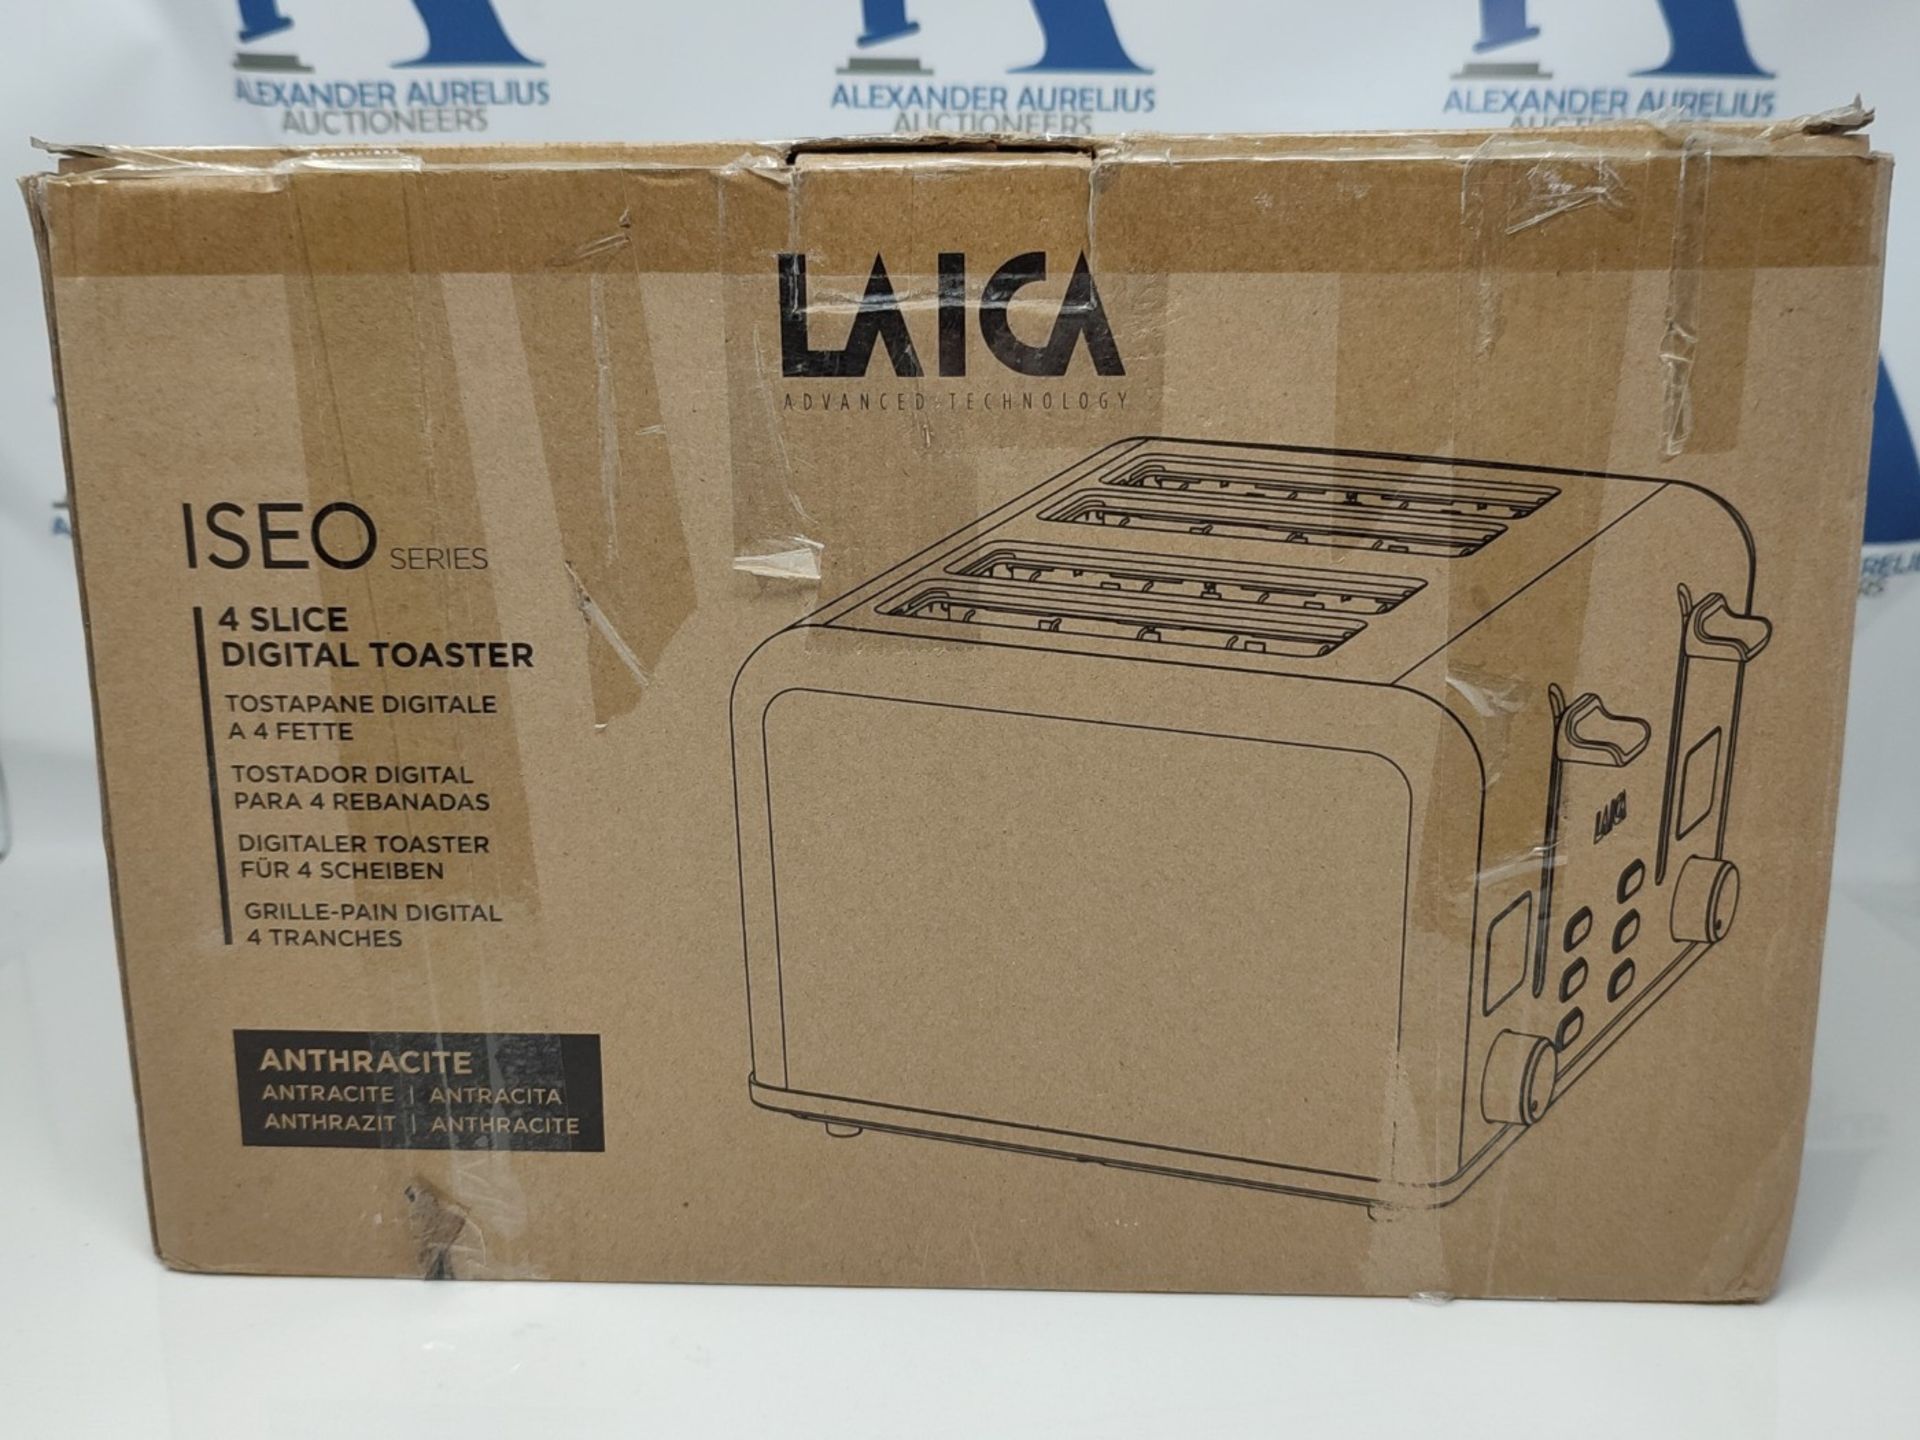 LAICA ISEO 4 slice digital toaster with Independent High Lift & Extra-Wide Slots, Defr - Bild 3 aus 3